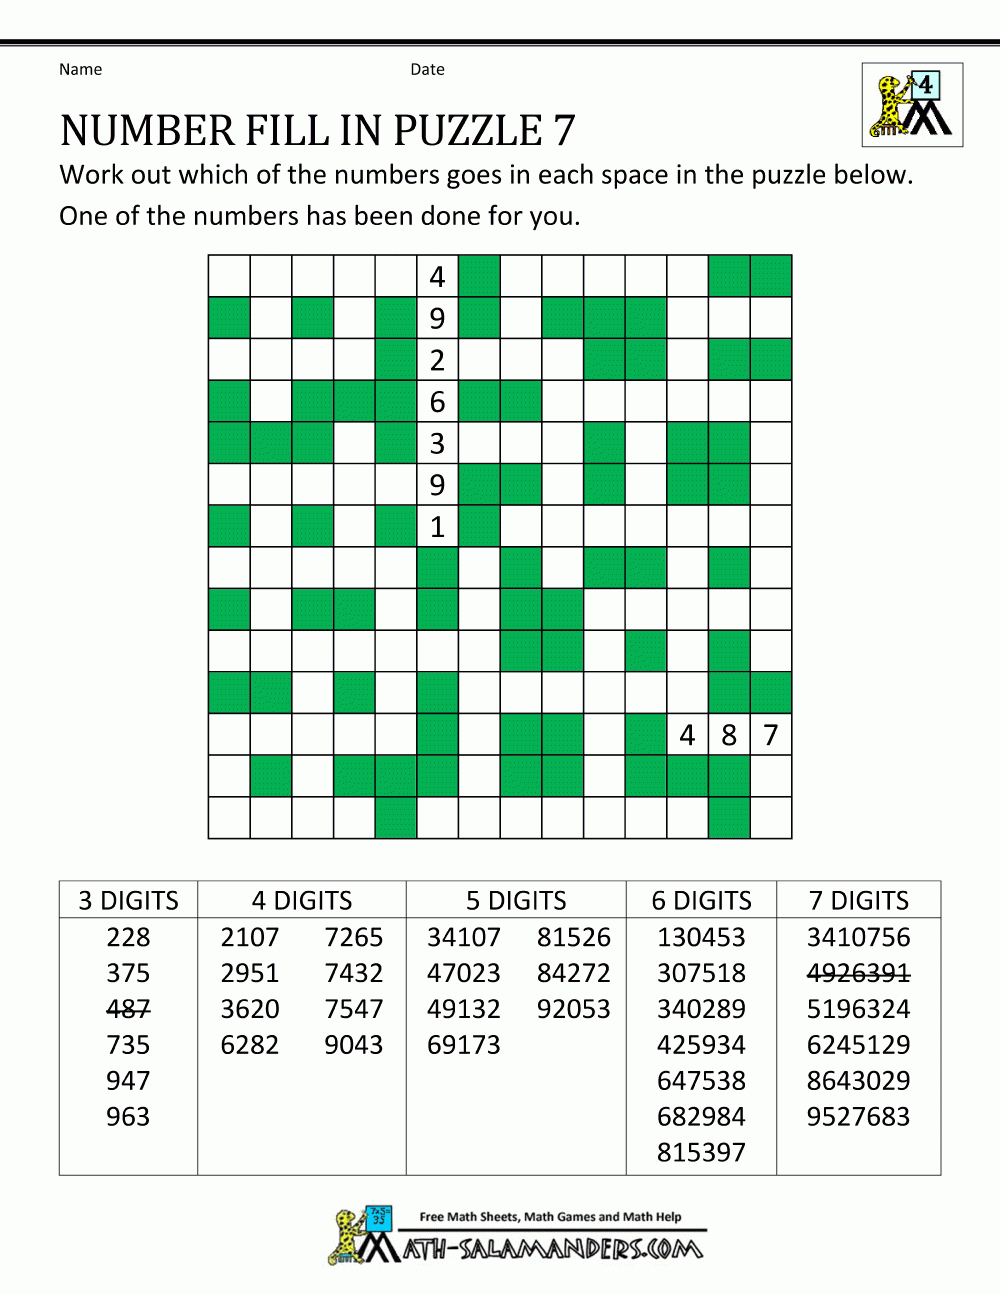 Crosswords Printable Math Puzzles Number Fill In Puzzle Crossword - Free Printable Math Puzzles